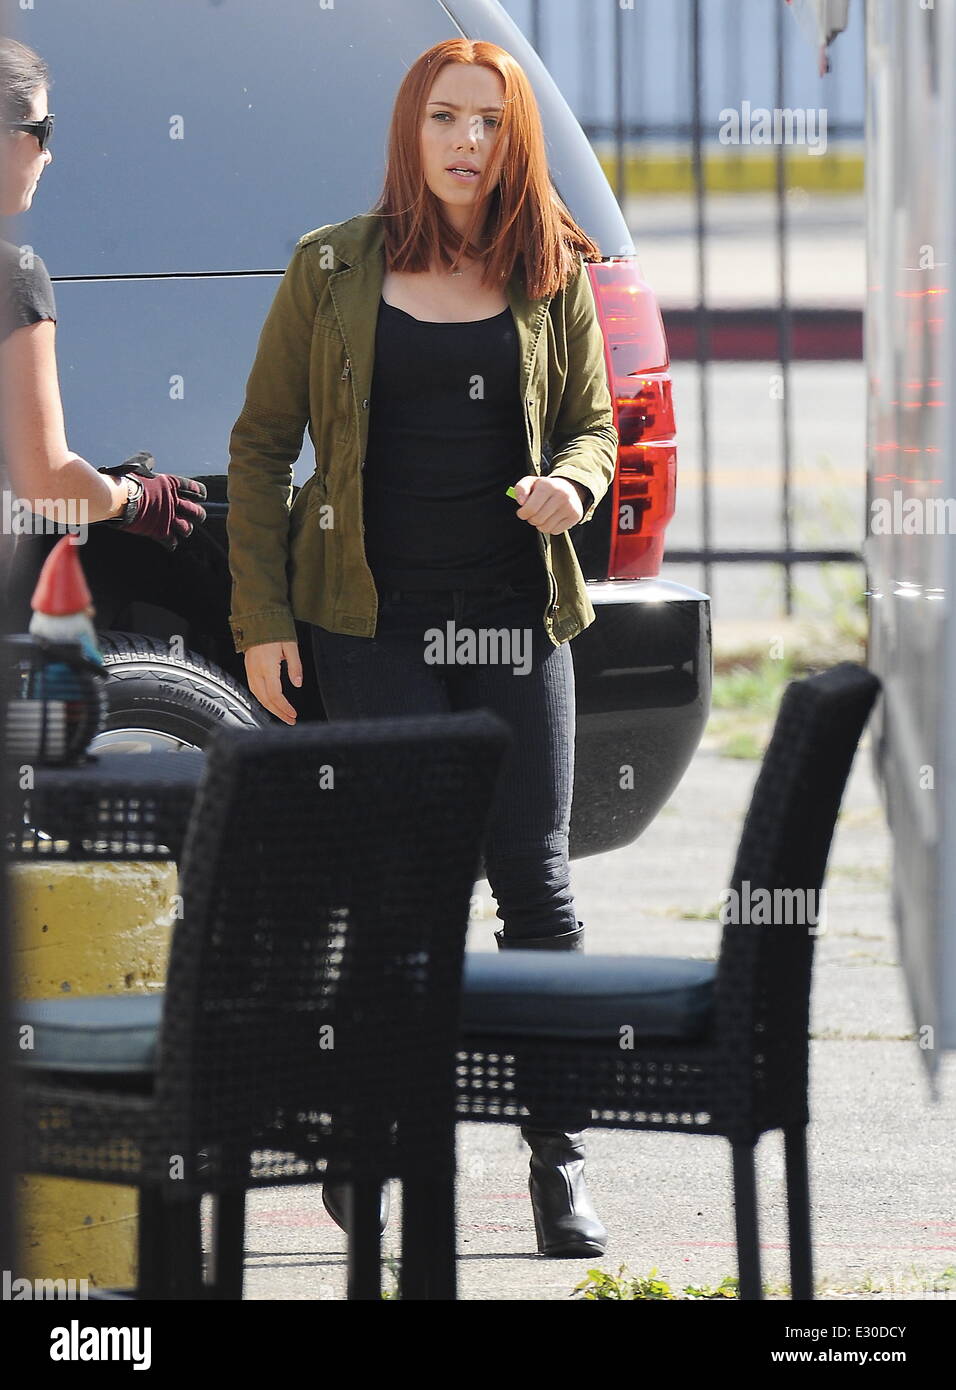 Actress Scarlett Johansson spotted filming 'Captain America: The Winter Soldier' who plays Black Widow.  Featuring: Scarlett Johansson Where: Los Angeles, California, United States When: 23 Apr 2013 Stock Photo